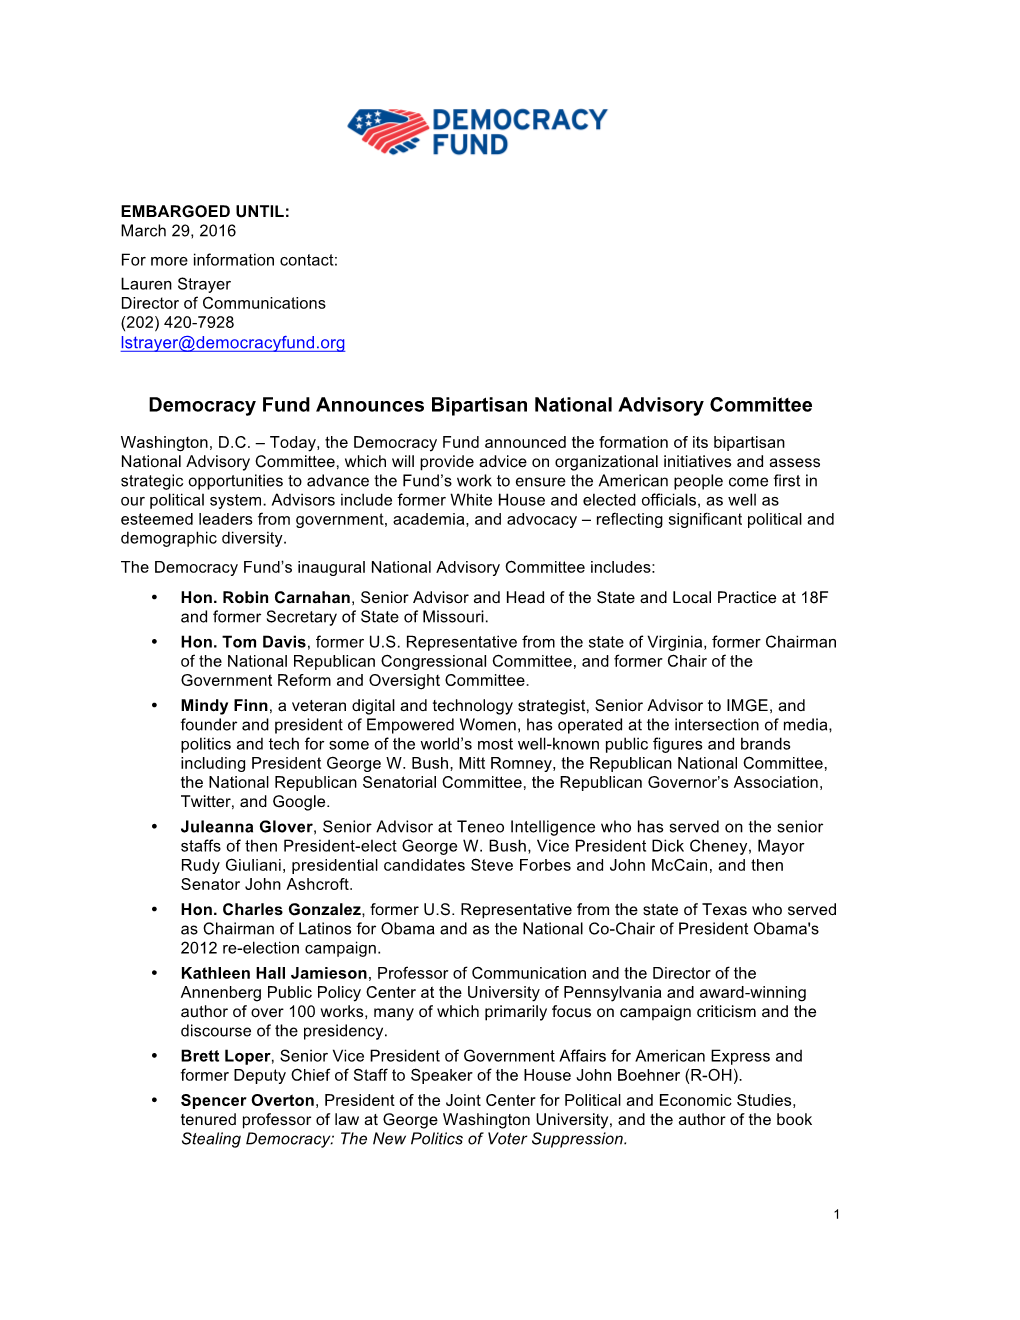 Democracy Fund Announces Bipartisan National Advisory Committee